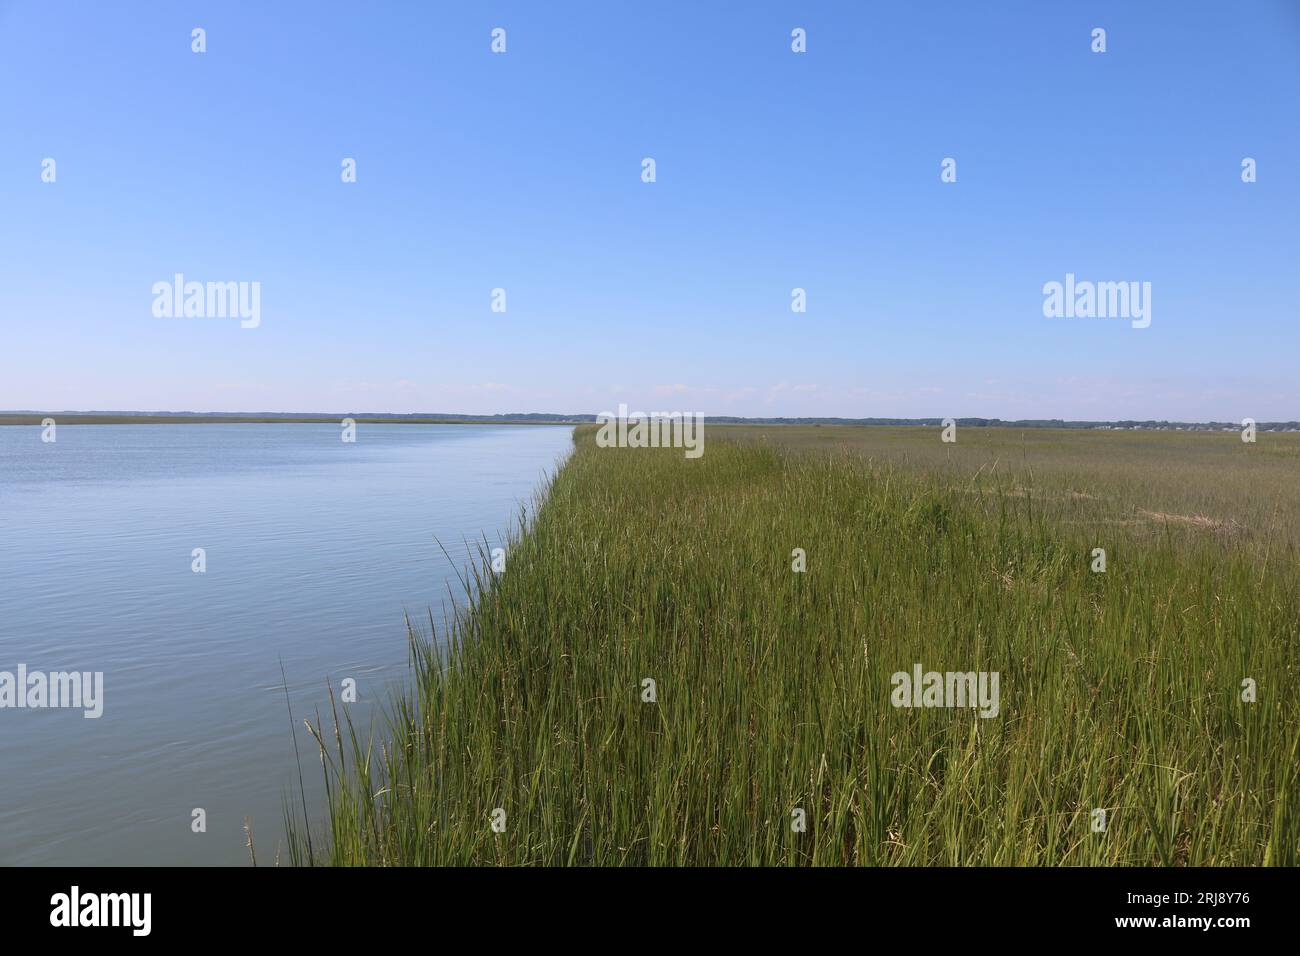 The untouched, preserved saltmarshes of Virginia, USA. Stock Photo